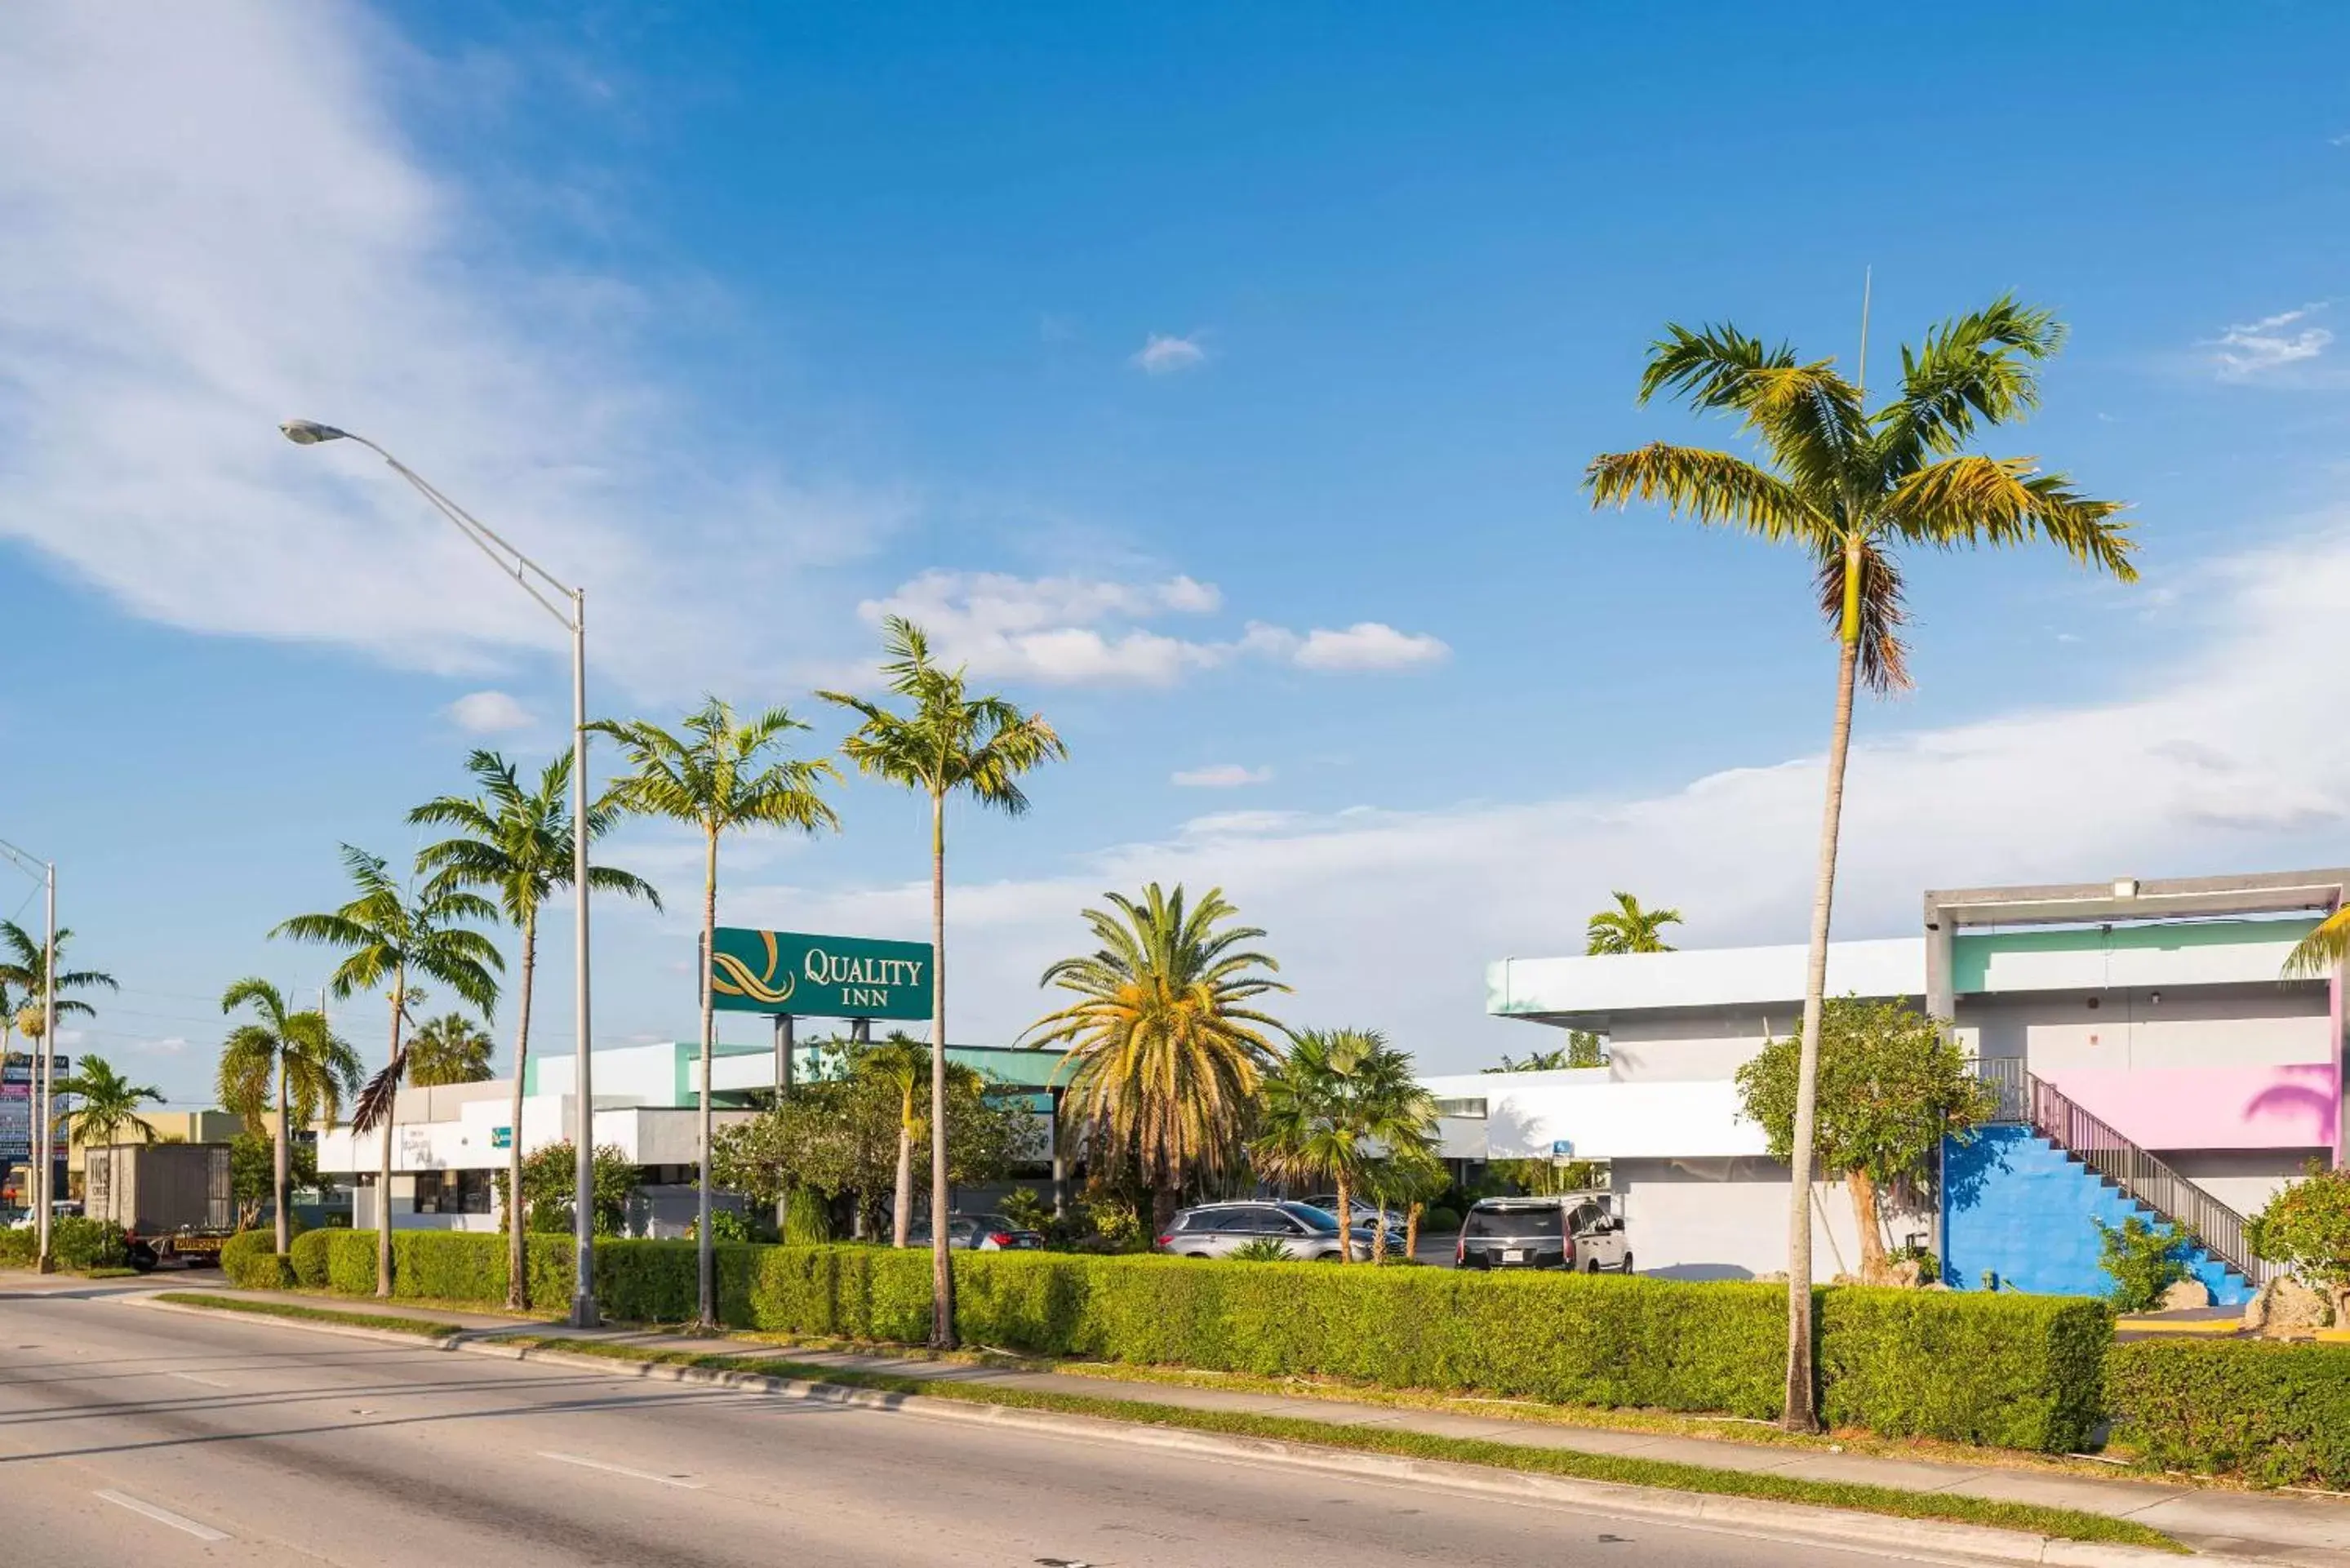 Property building in Quality Inn Miami South